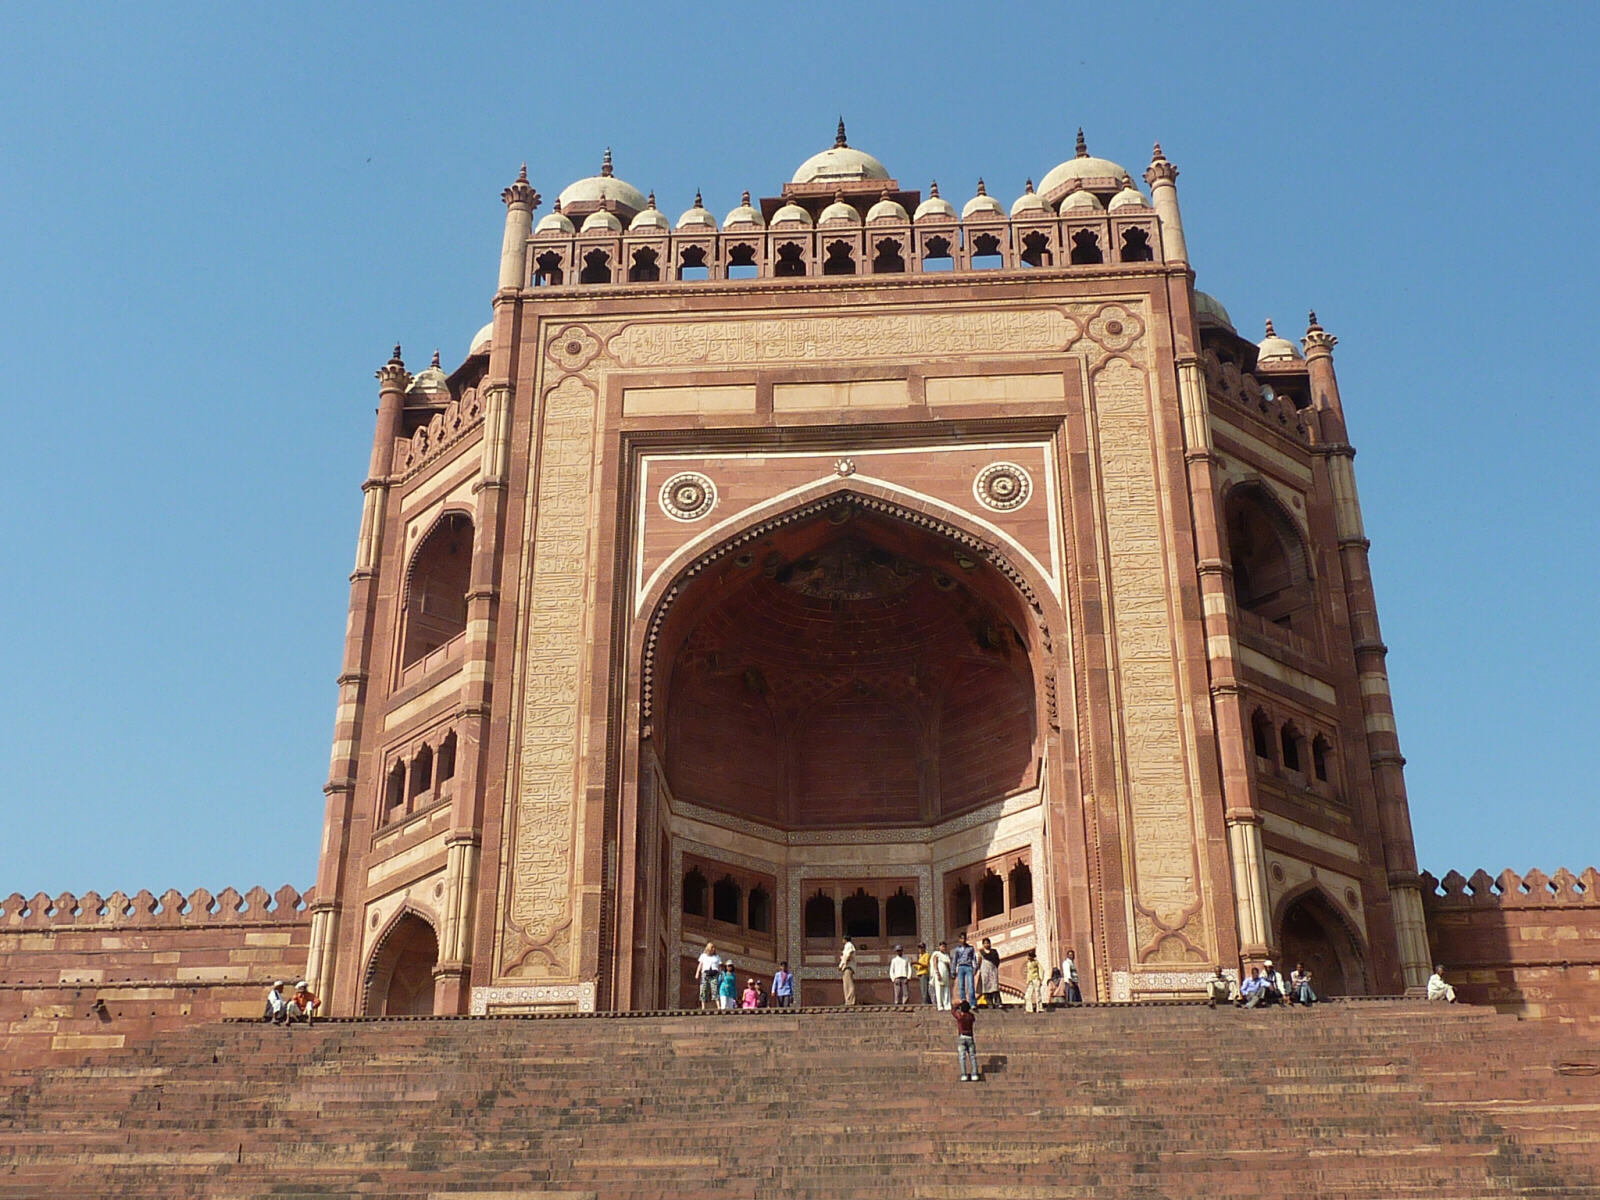 The mosque at Fatehpur Sikri, India